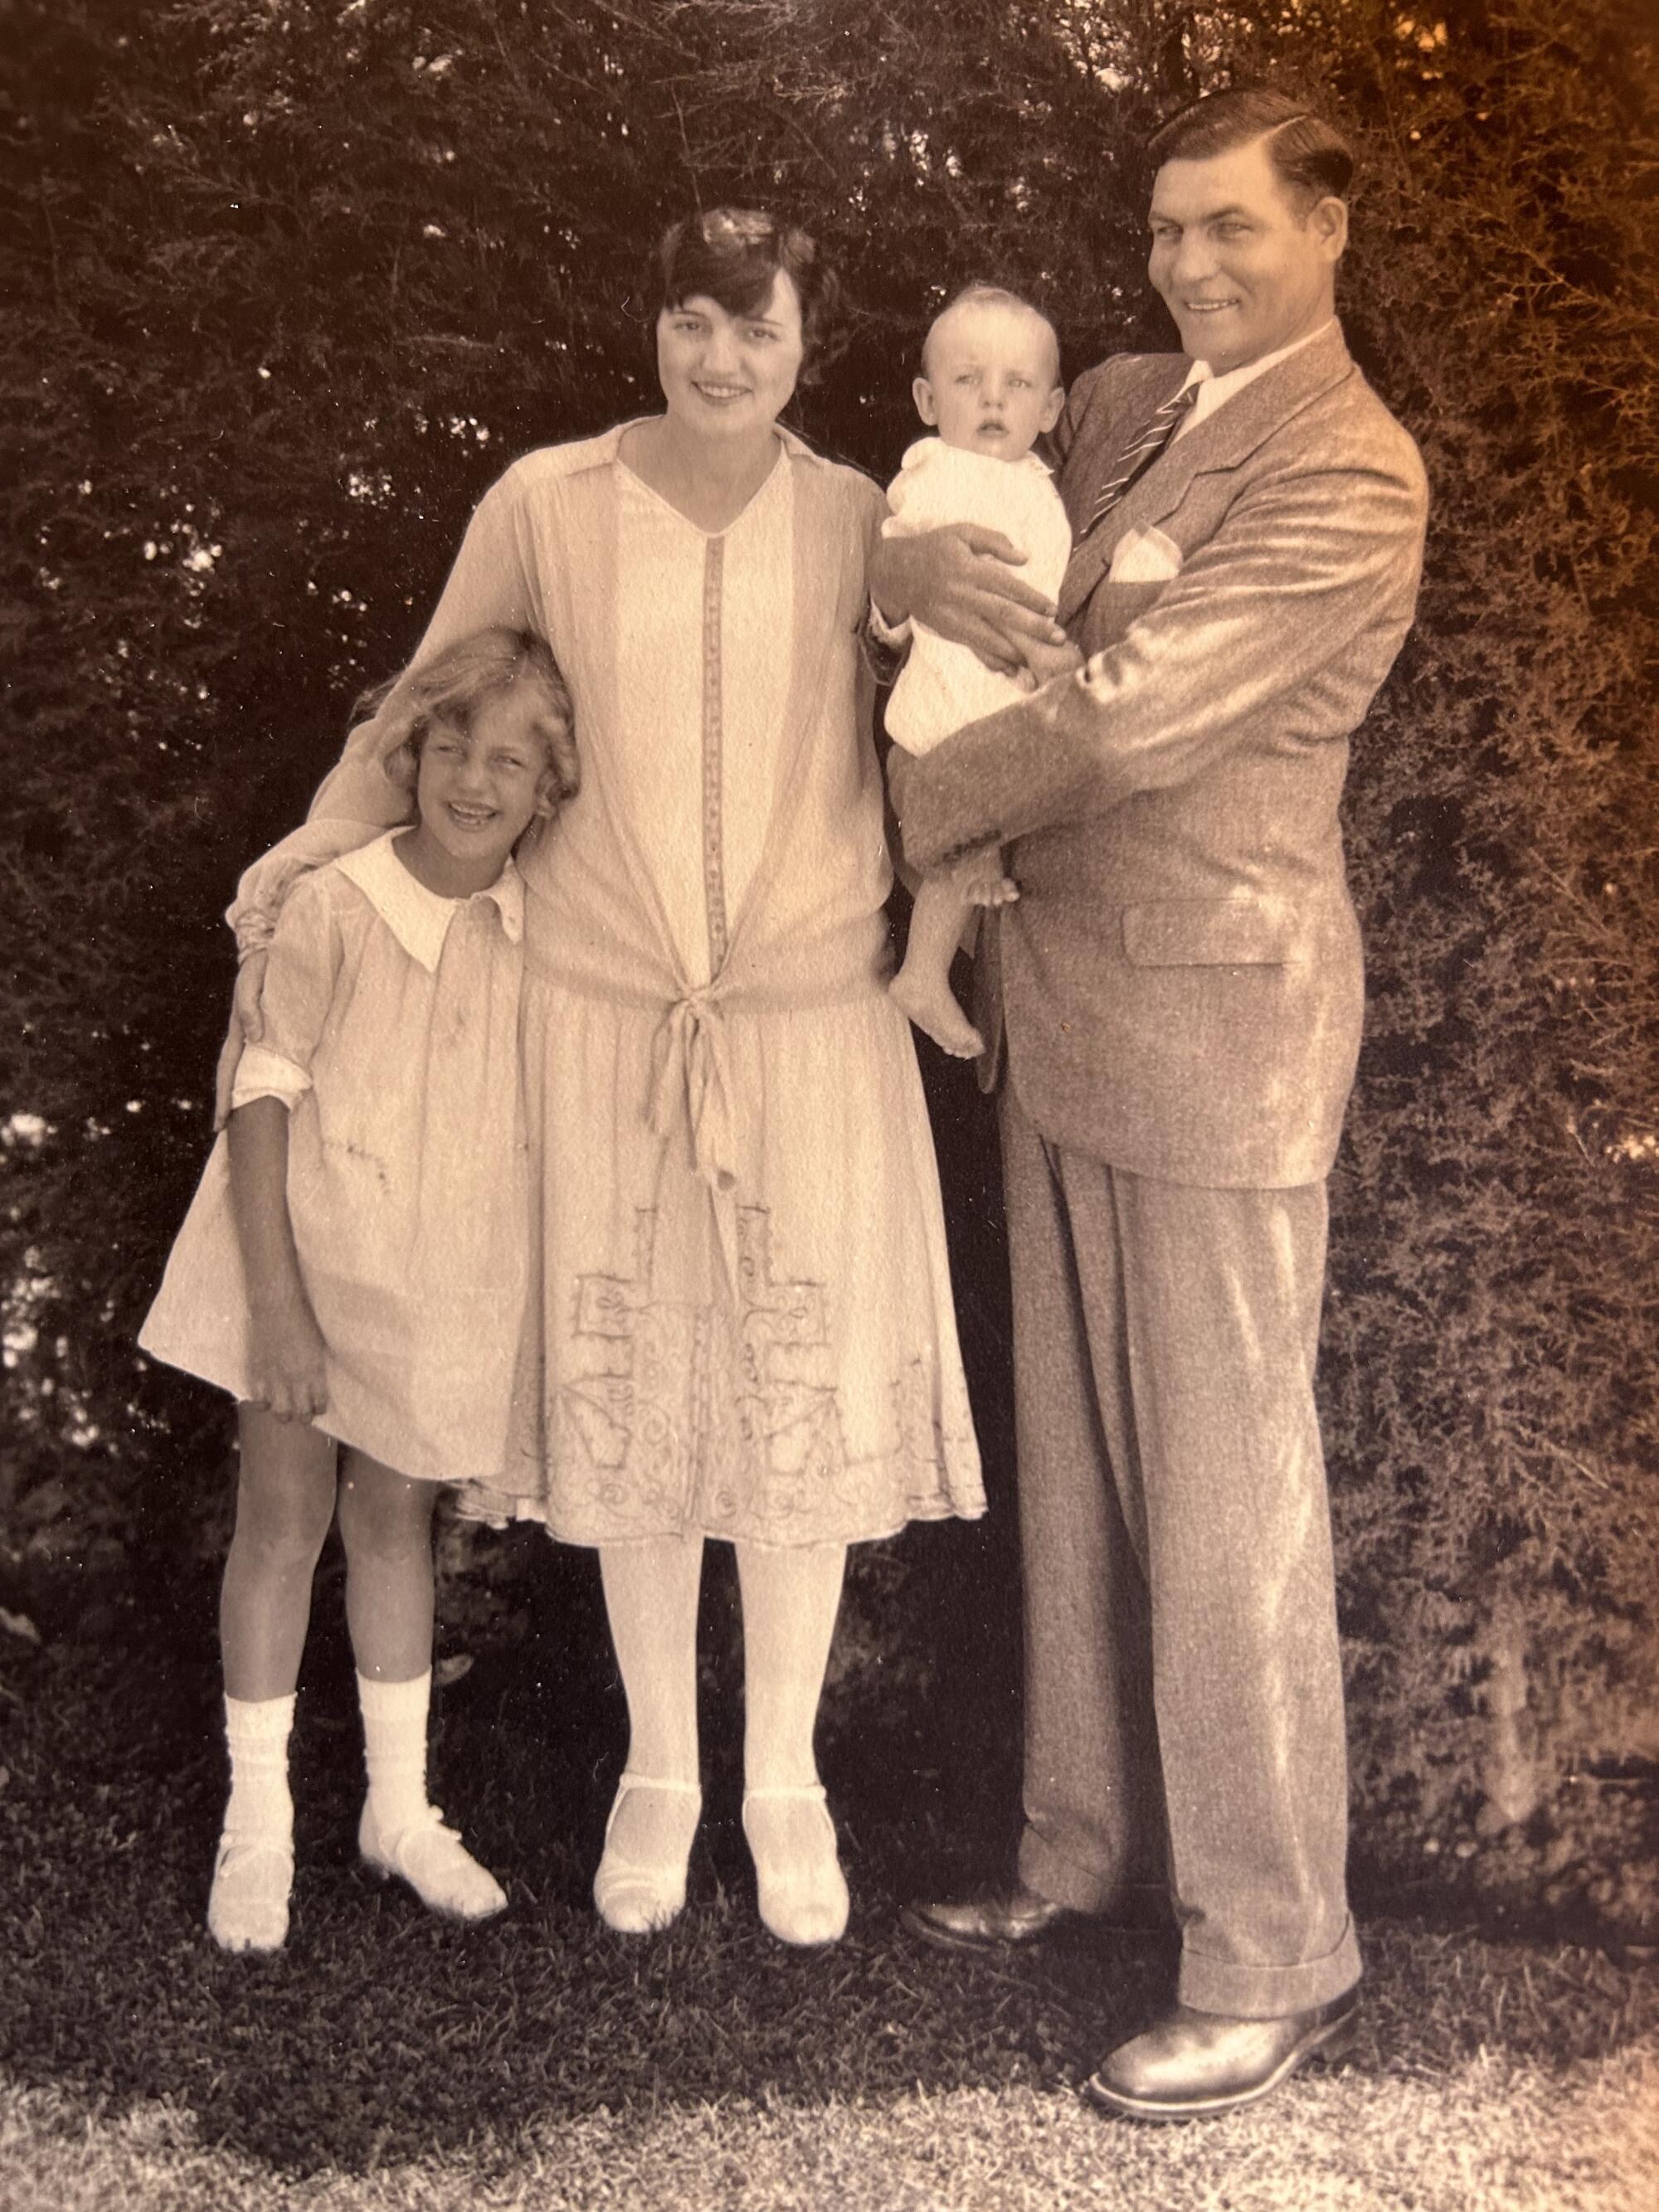 A man stands holding a baby next to a woman and a young girl, all in 1920s clothing in a vintage photo